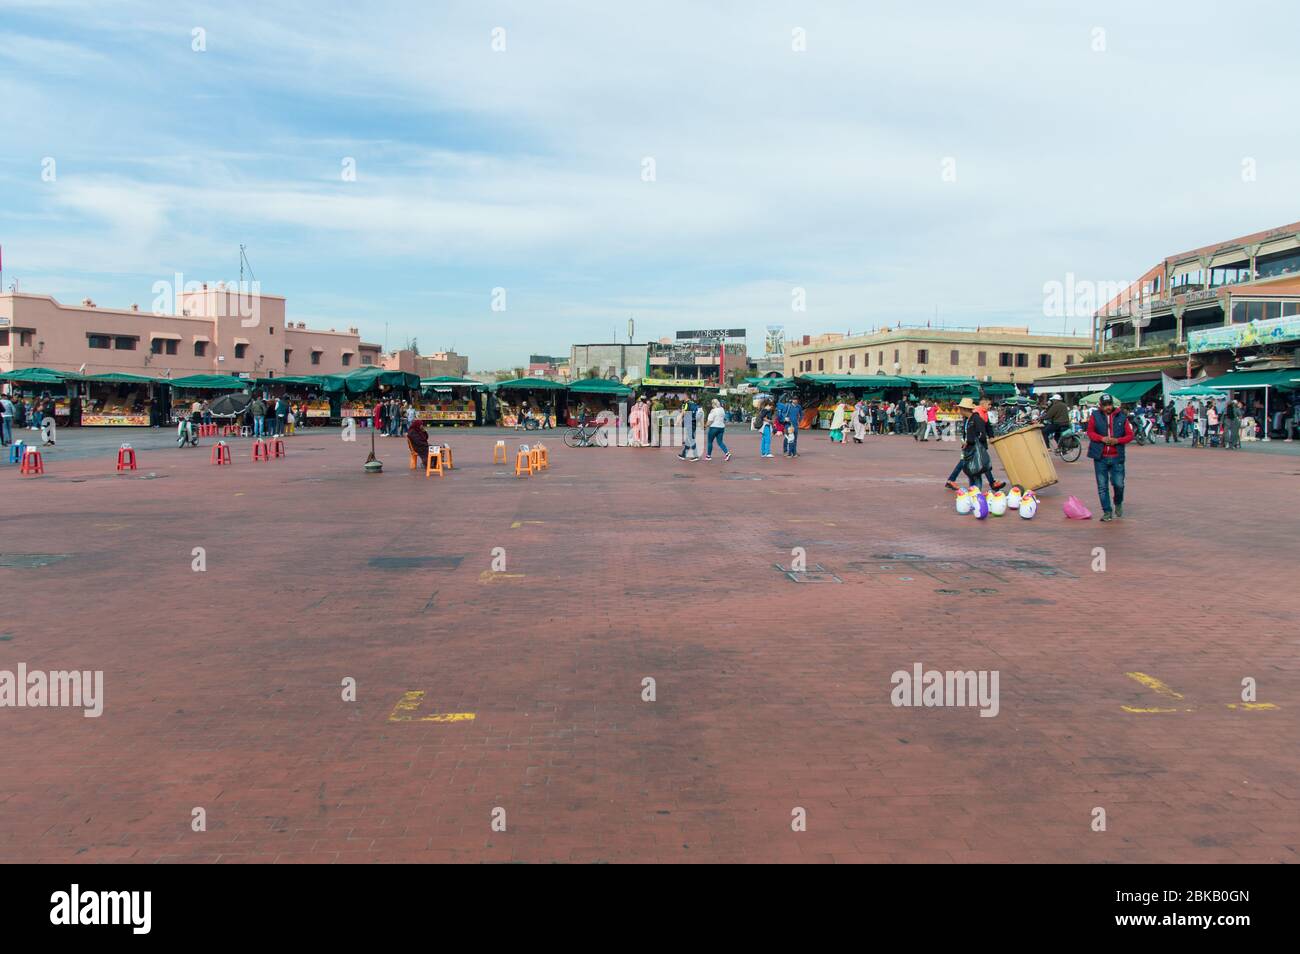 UNESCO site Marrakesh market wide open with no stalls during daytime Stock Photo